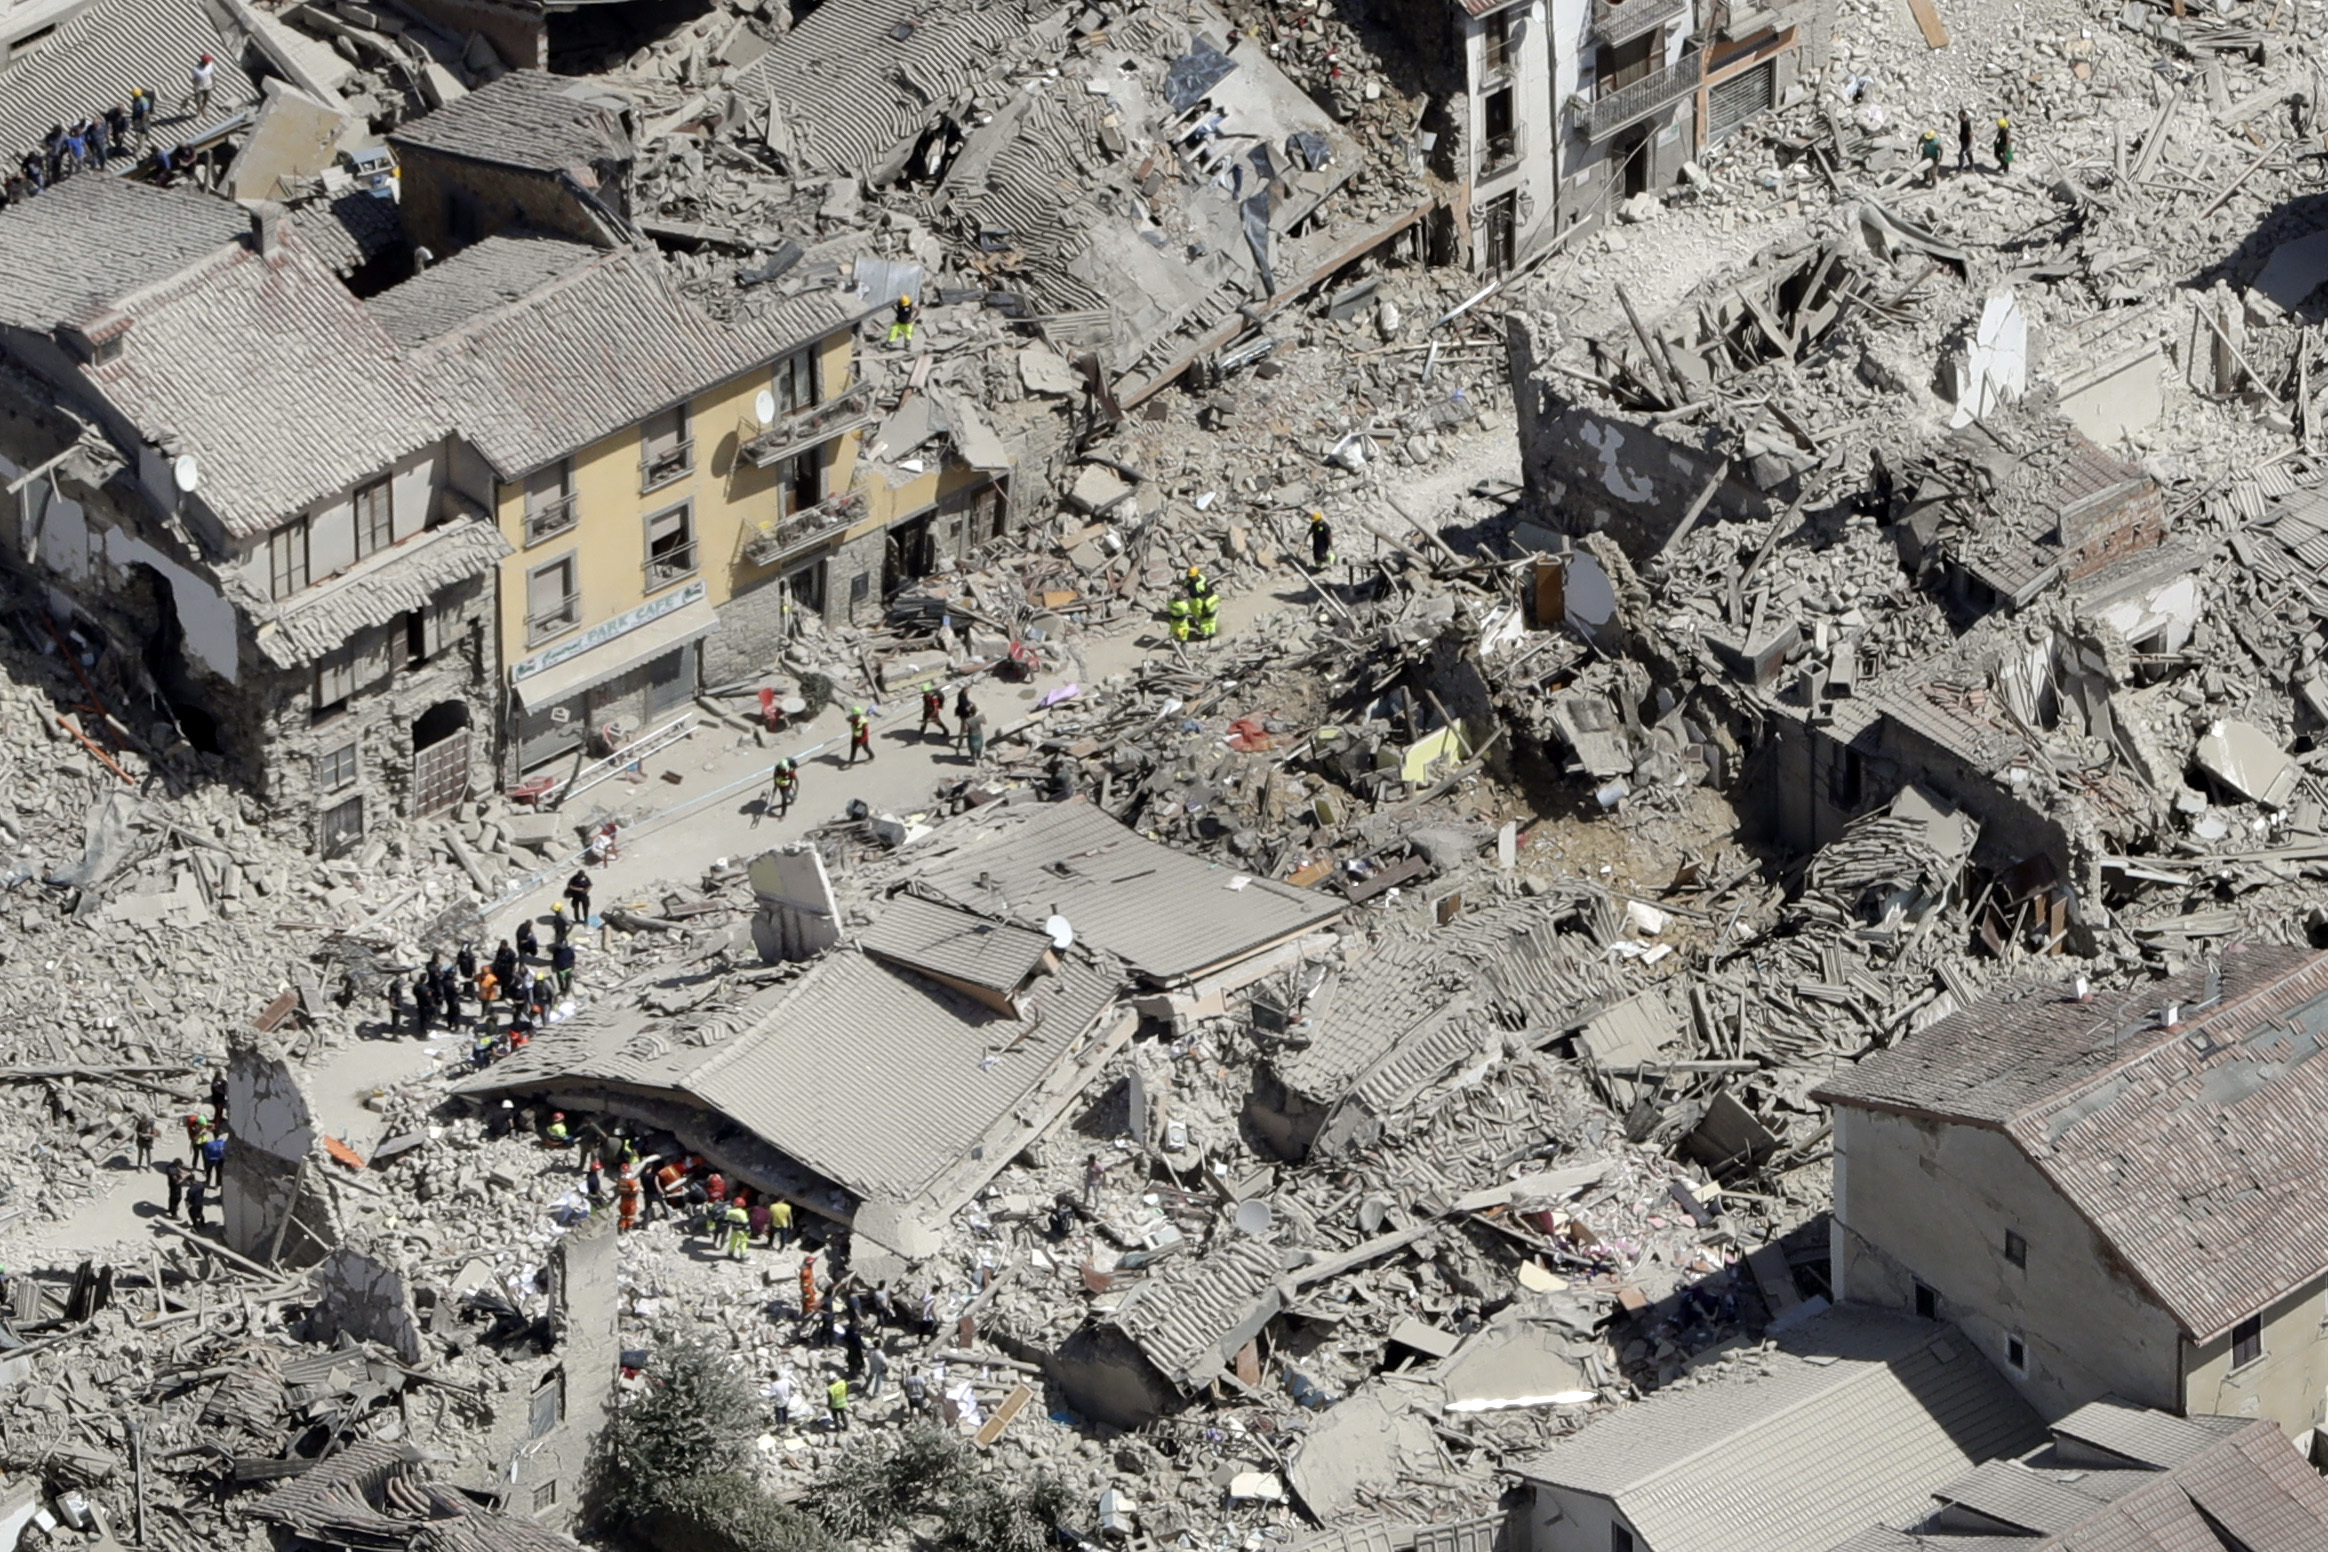 PHOTO: Rescuers search following an earthquake in Amatrice, Italy, Aug. 24, 2016.